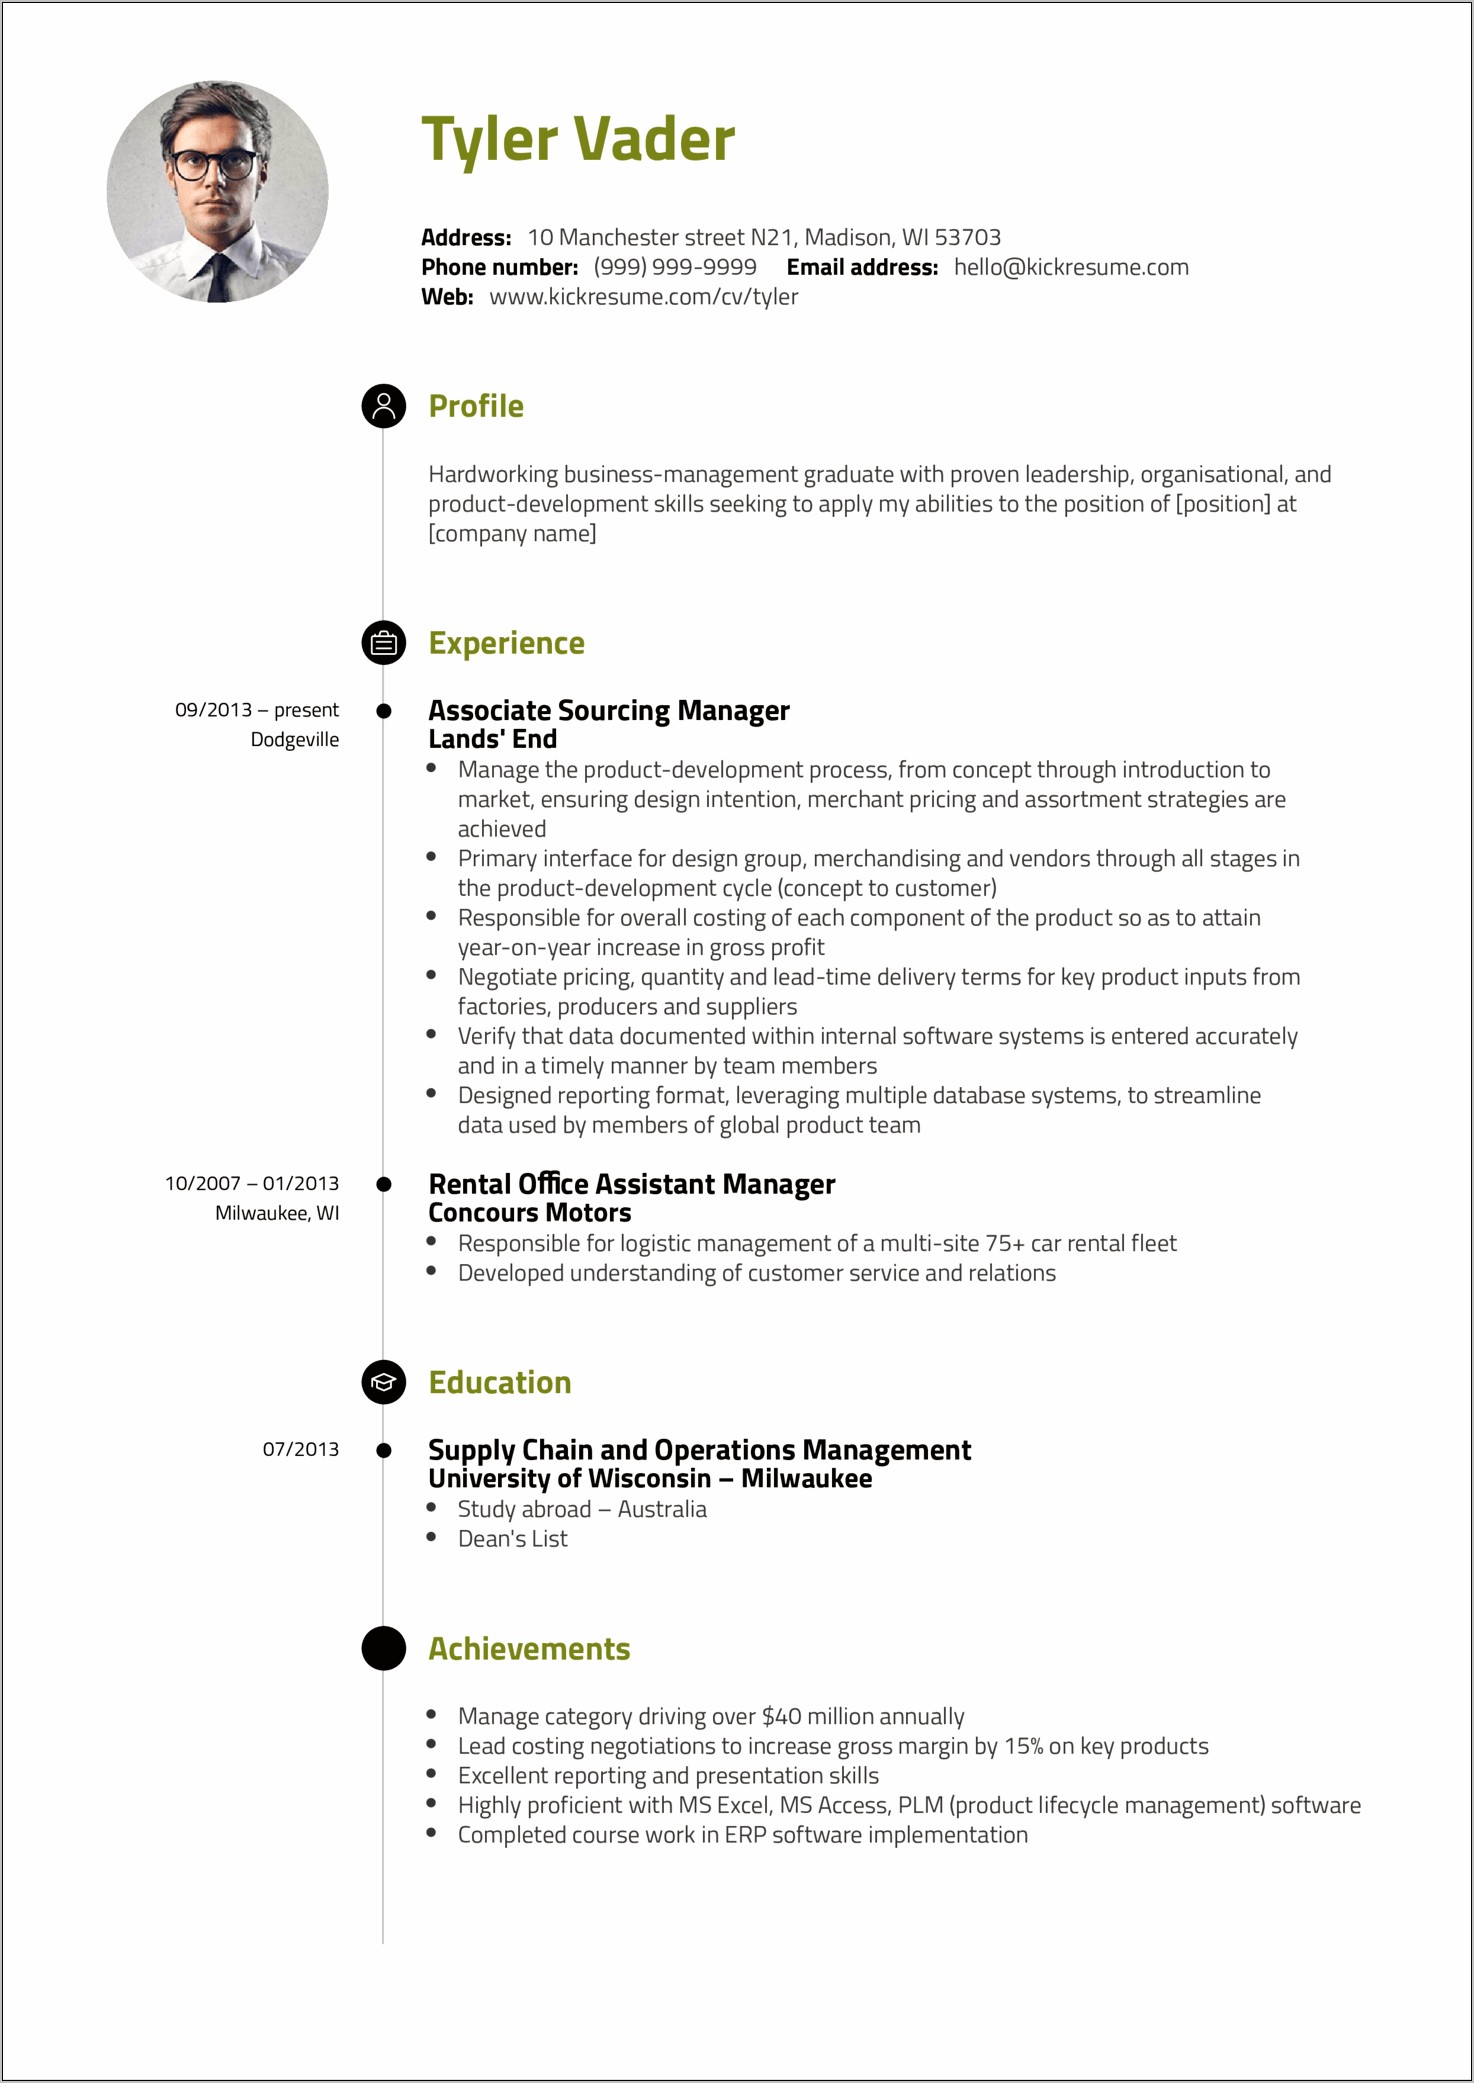 Example Resume Strengths And Weaknesses